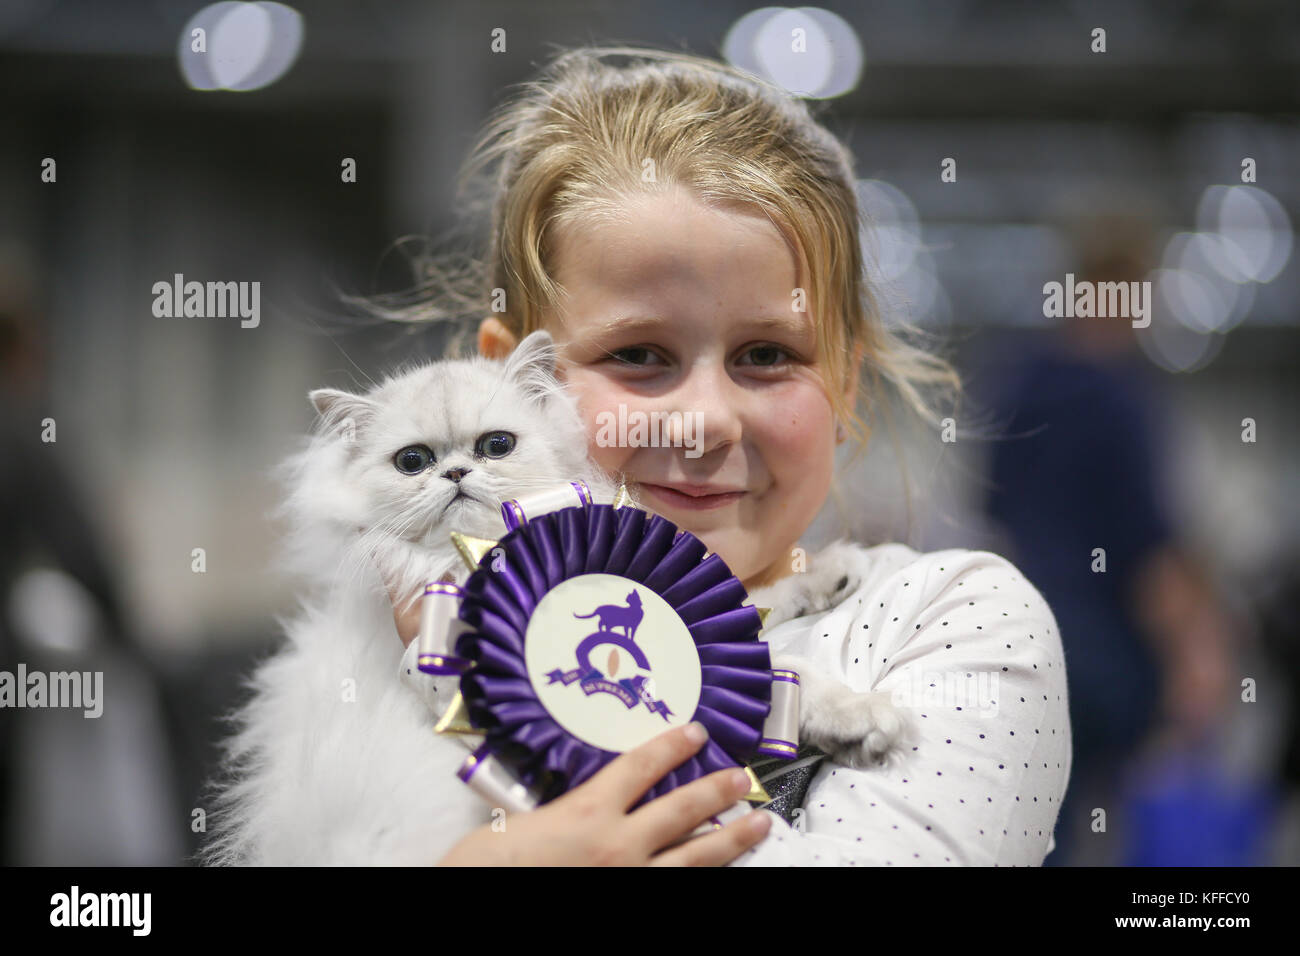 Birmingham, UK. 28th October 2017. Cats and their owners descend on the NEC to show their pedigree bred cats. 8-year-old Nicole Gibson with her prize-winning kitten Emporiums Starlight.   Peter Lopeman/Alamy Live News Stock Photo